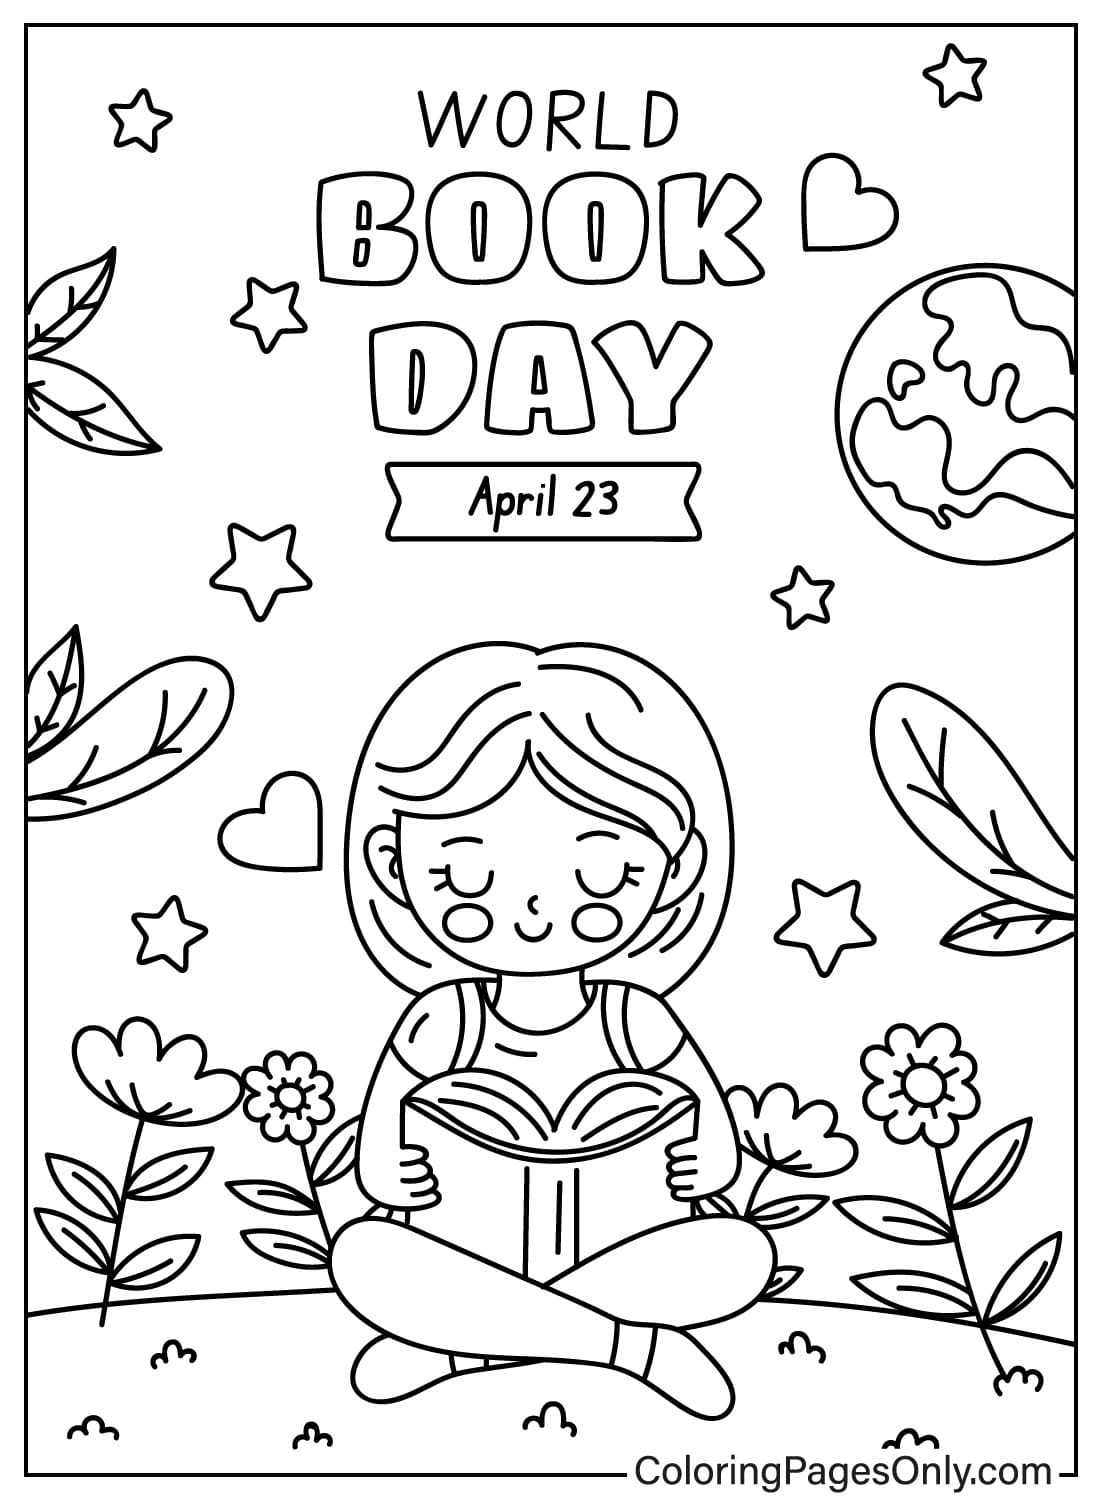 World Book Day Coloring Sheet for Kids from World Book Day